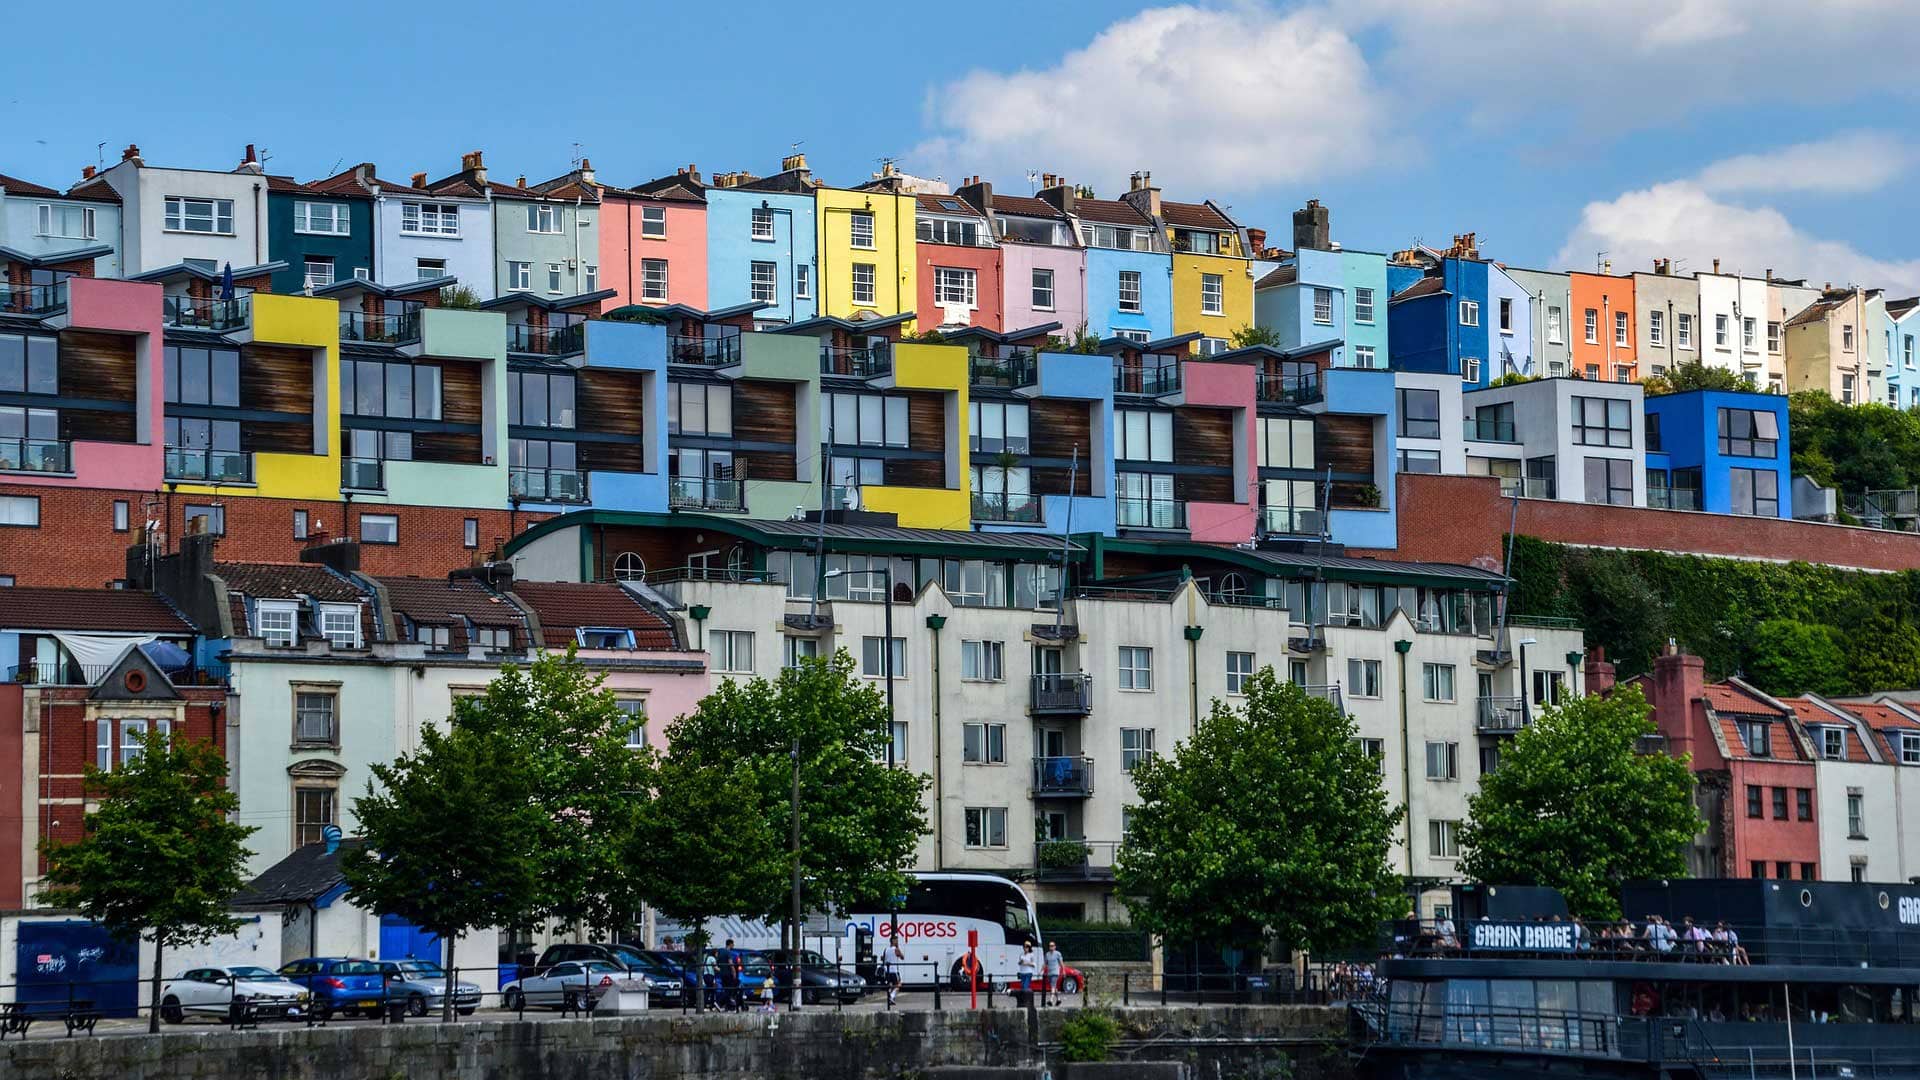 Colourful houses in Bristol.